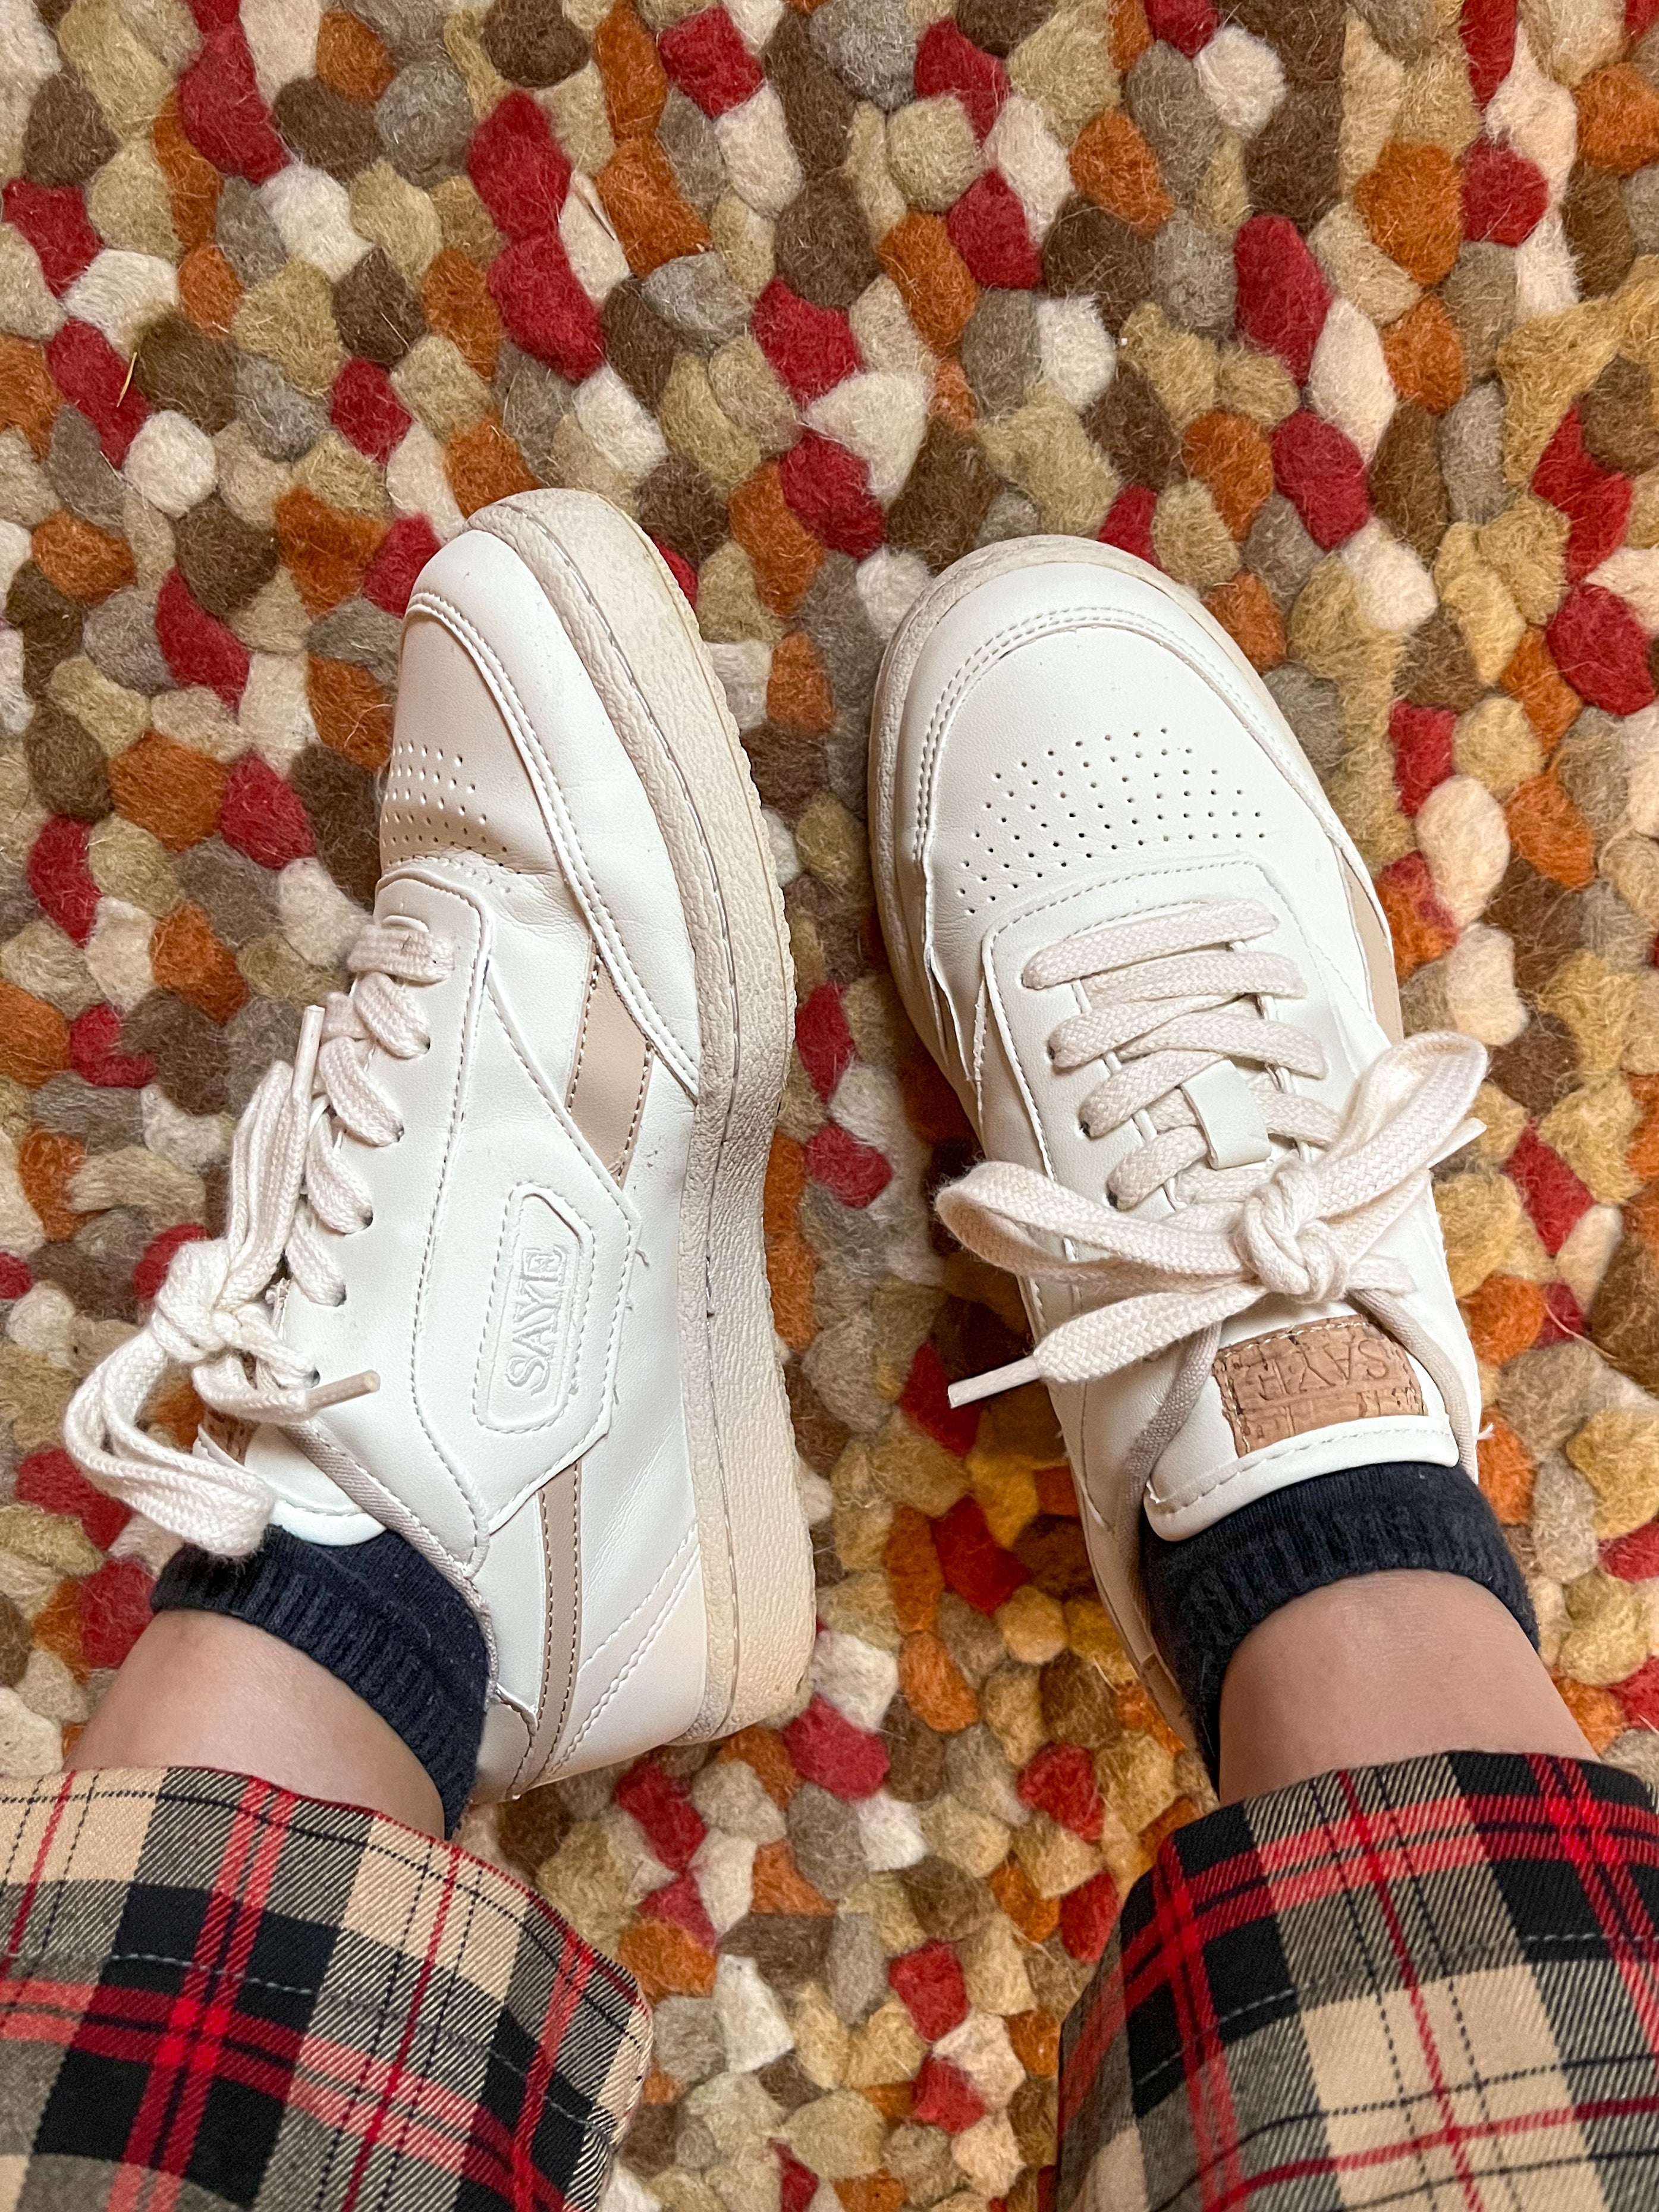 These Vegan Shoes Are Comfy & For Earth